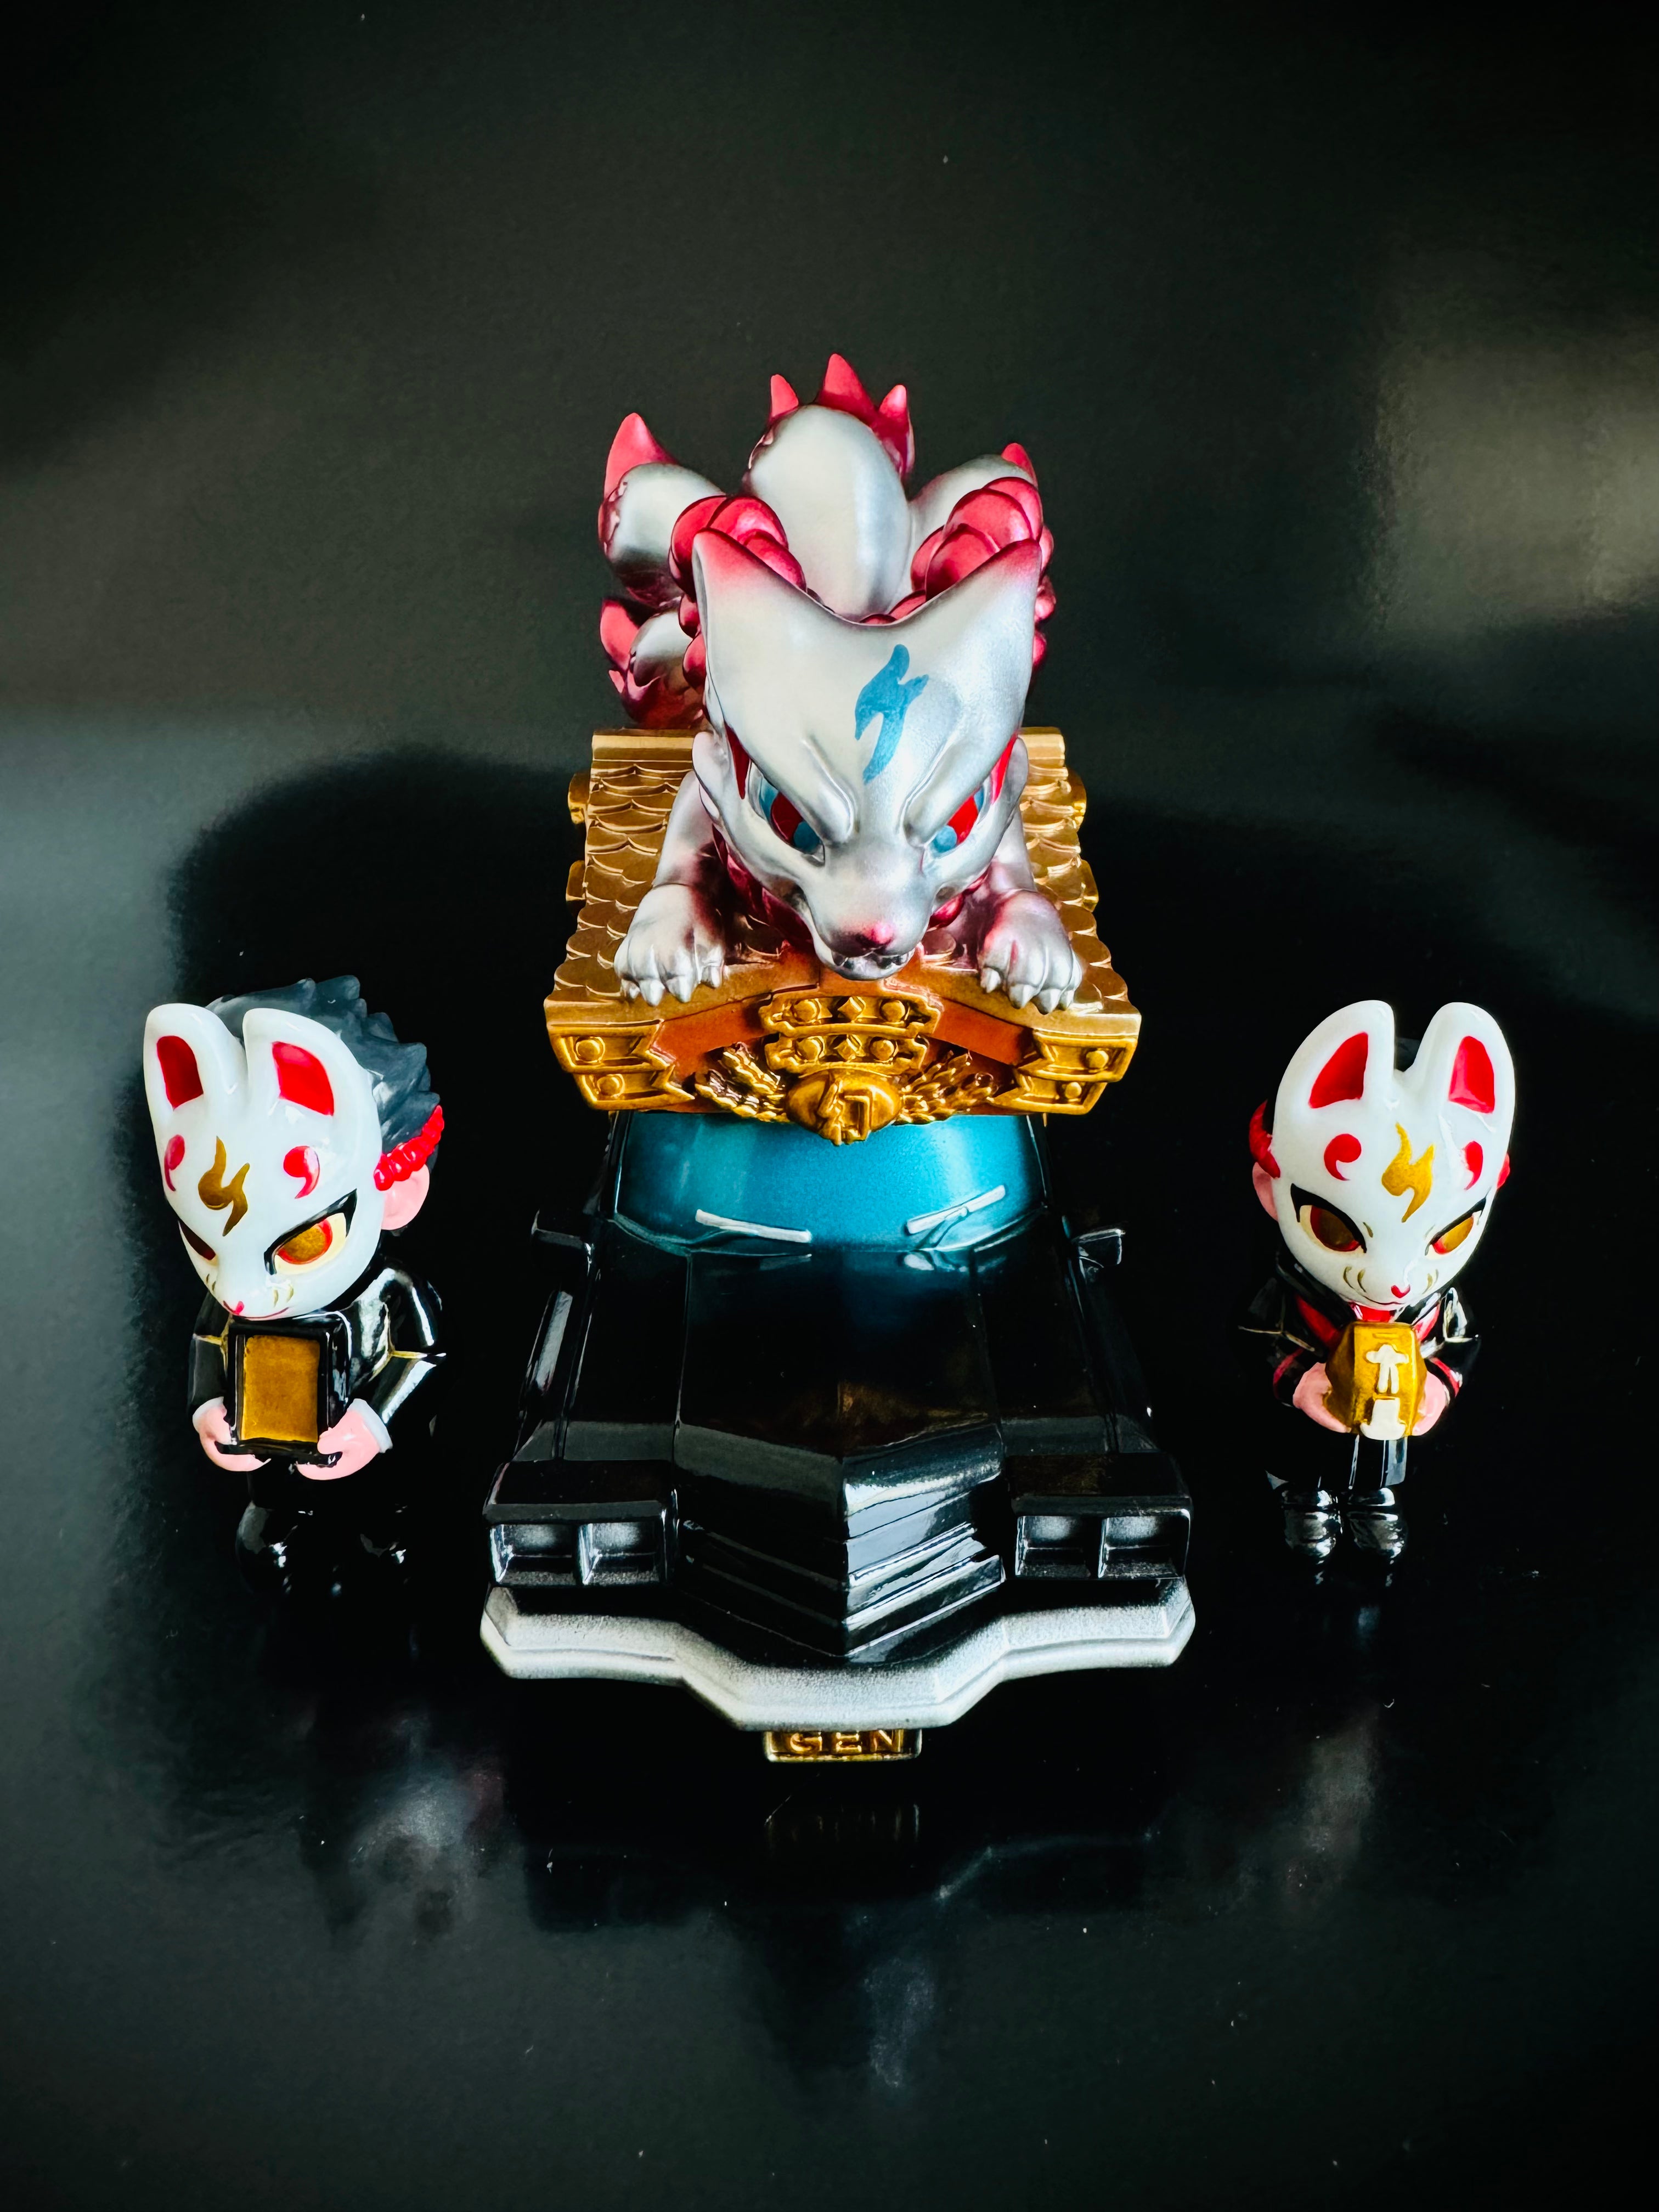 A blind box and art toy store's Genkosha Catafalque Set No 2: Golden & silver luxury car delivering a coffin, fox boy and girl figurines, and an openable coffin.